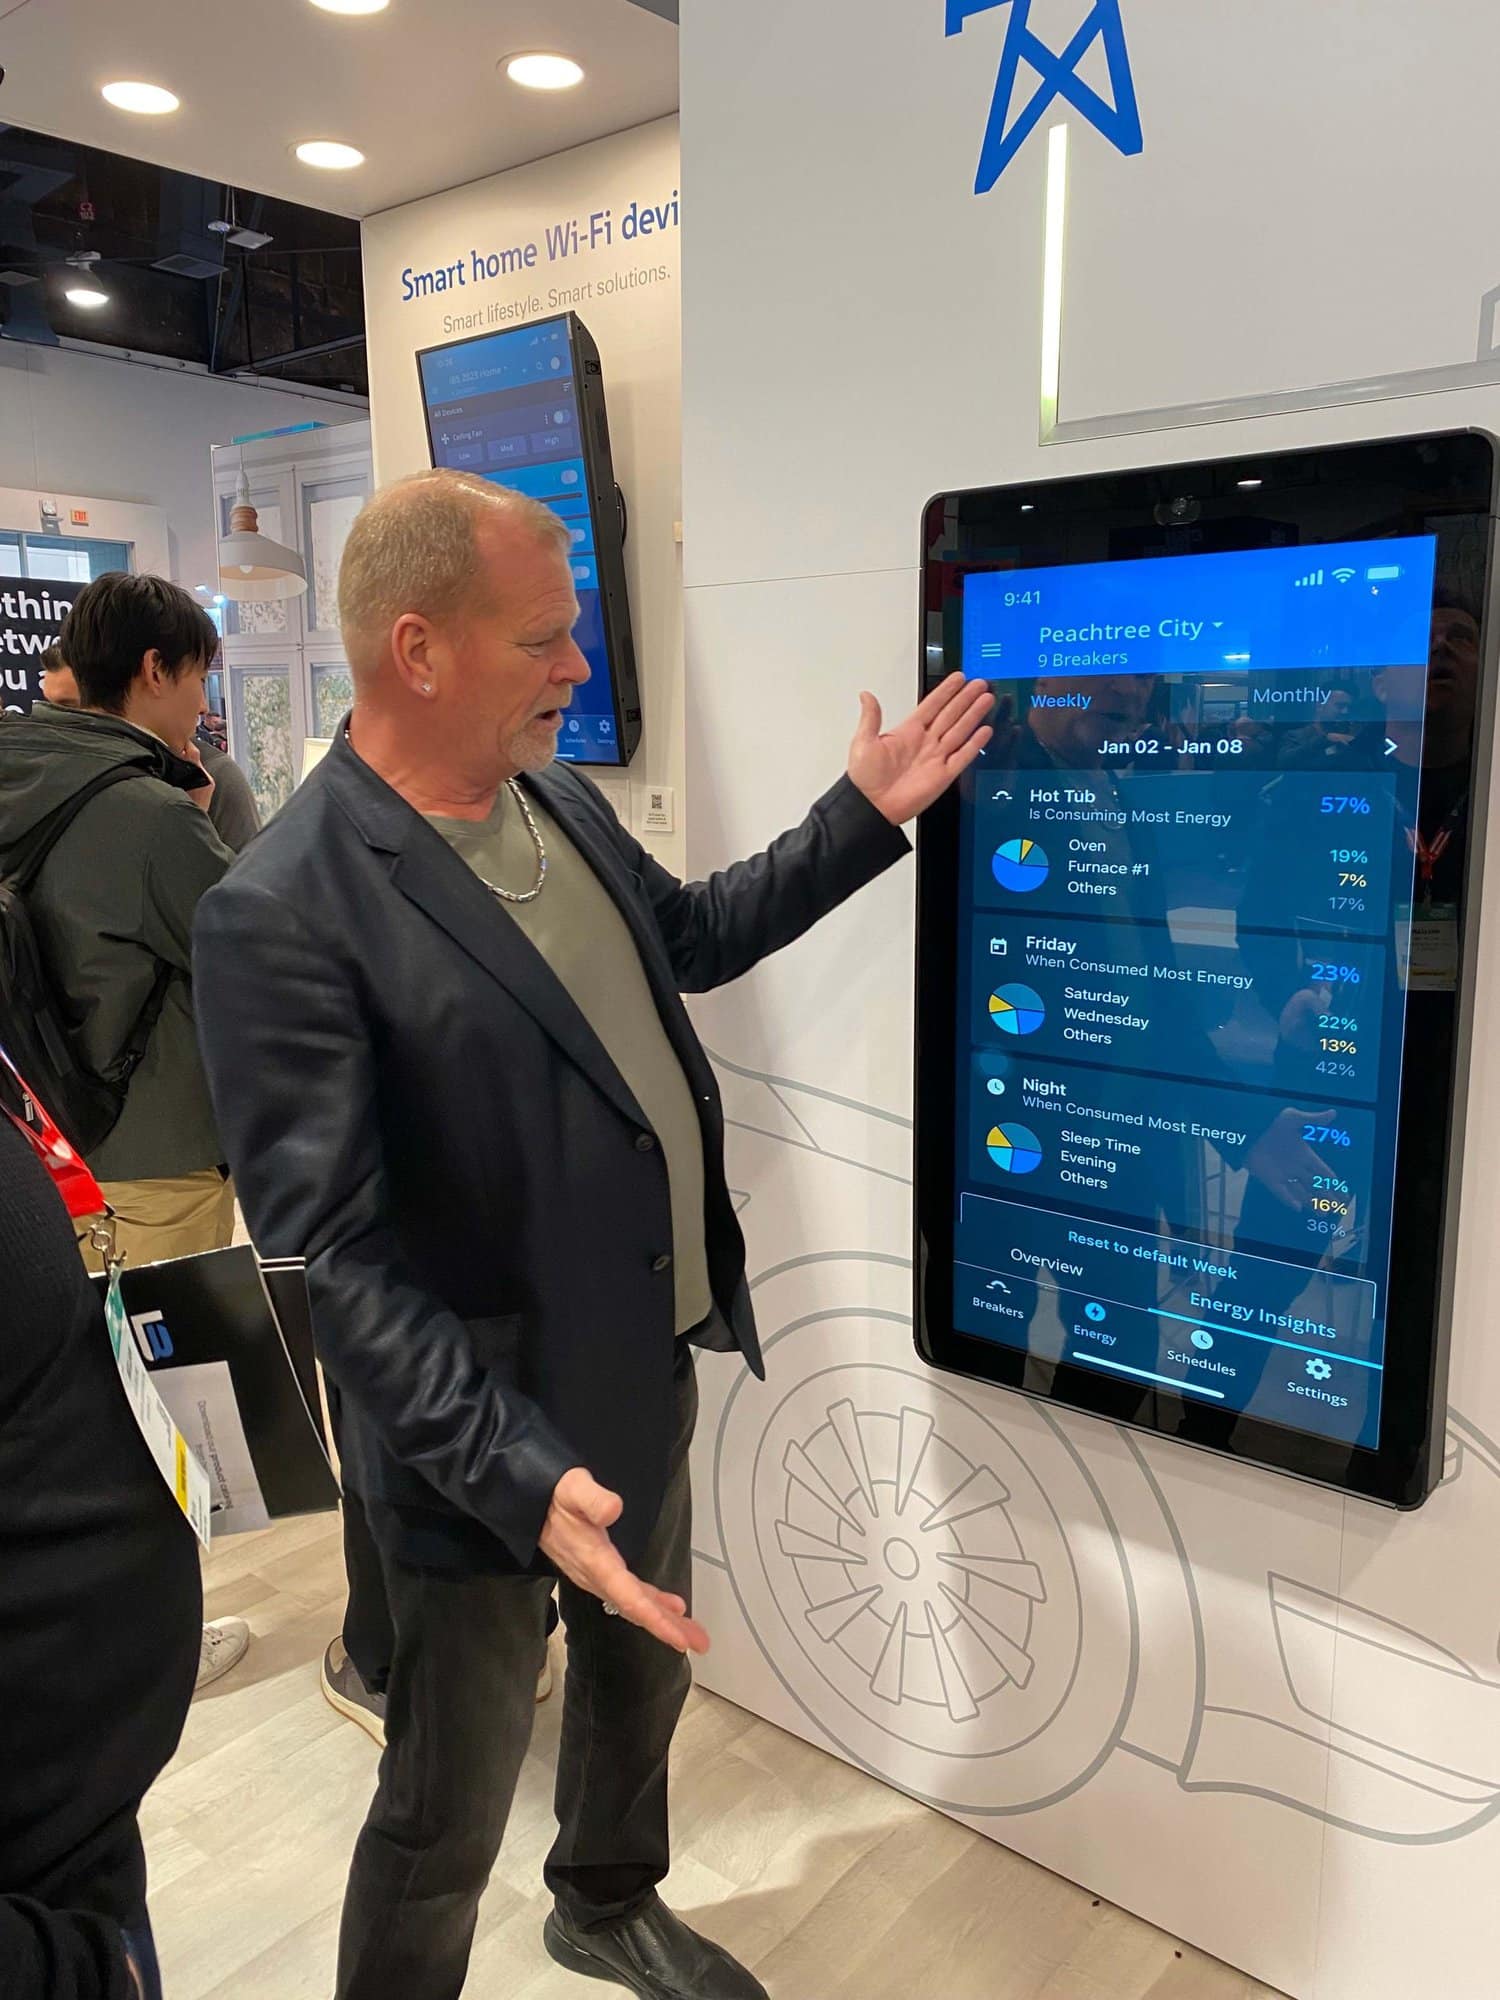 Mike Holmes looking at the Eaton smart home app showing the energy usage measured by the smart breaker.